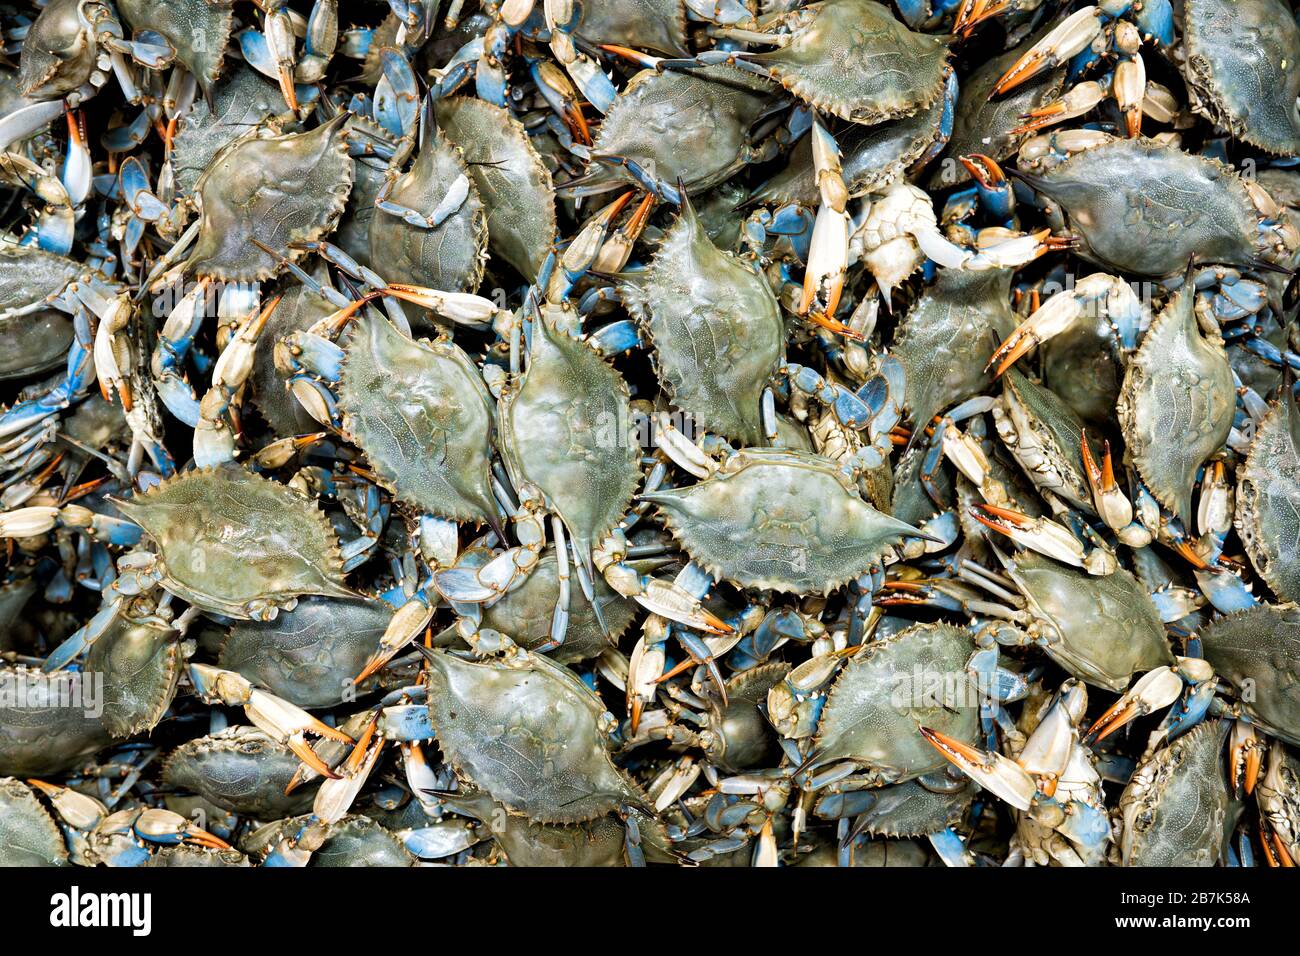 Chesapeake Bay, MD - Blue crabs (Callinectes sapidus) are a local specialty and delicacy of the mid-Atlantic region of the United States, especially the Chesapeake Bay area. Stock Photo